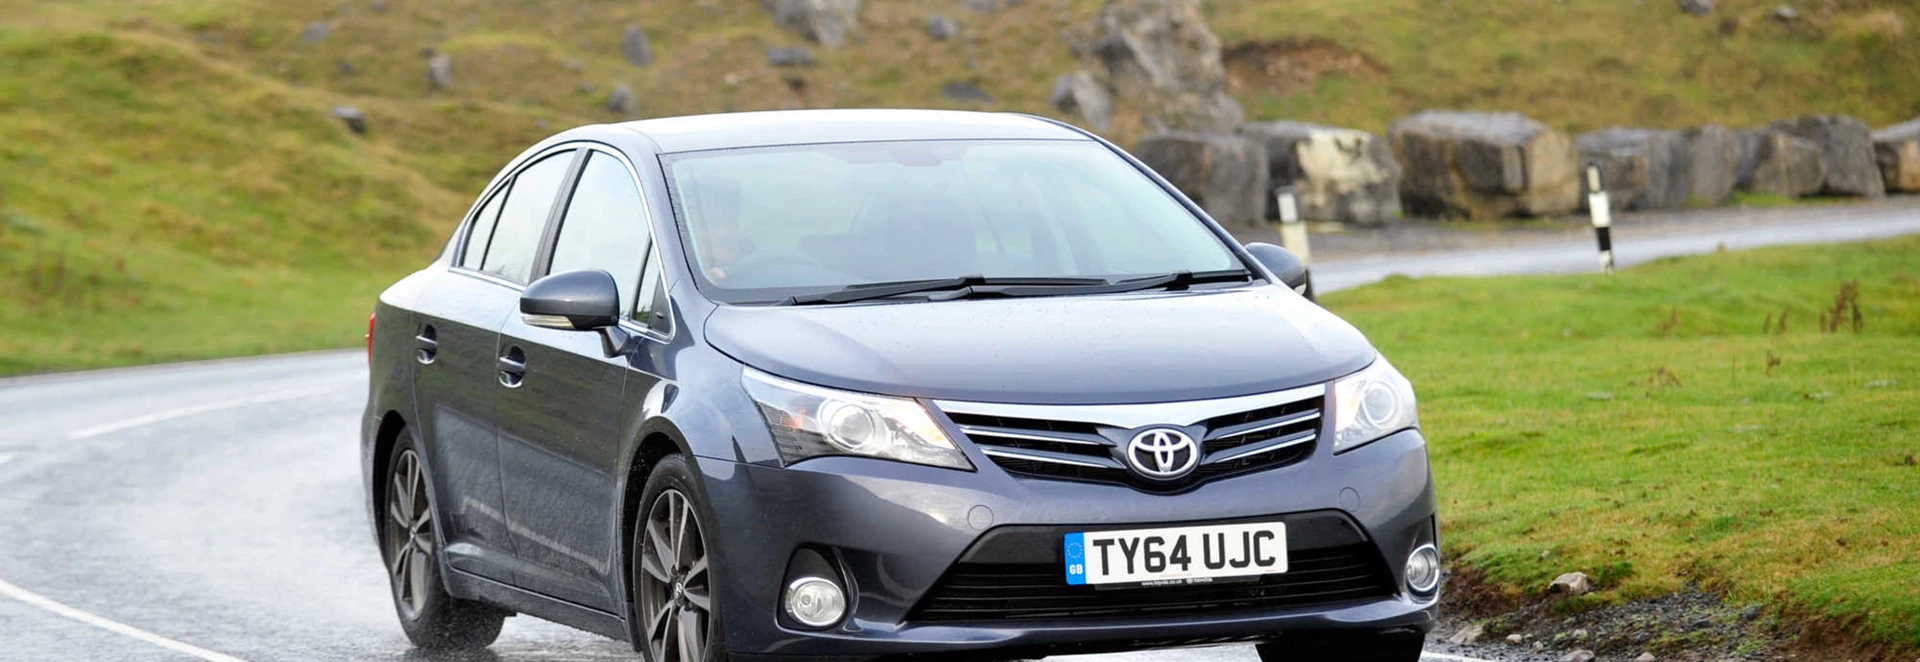 Toyota Avensis saloon review 